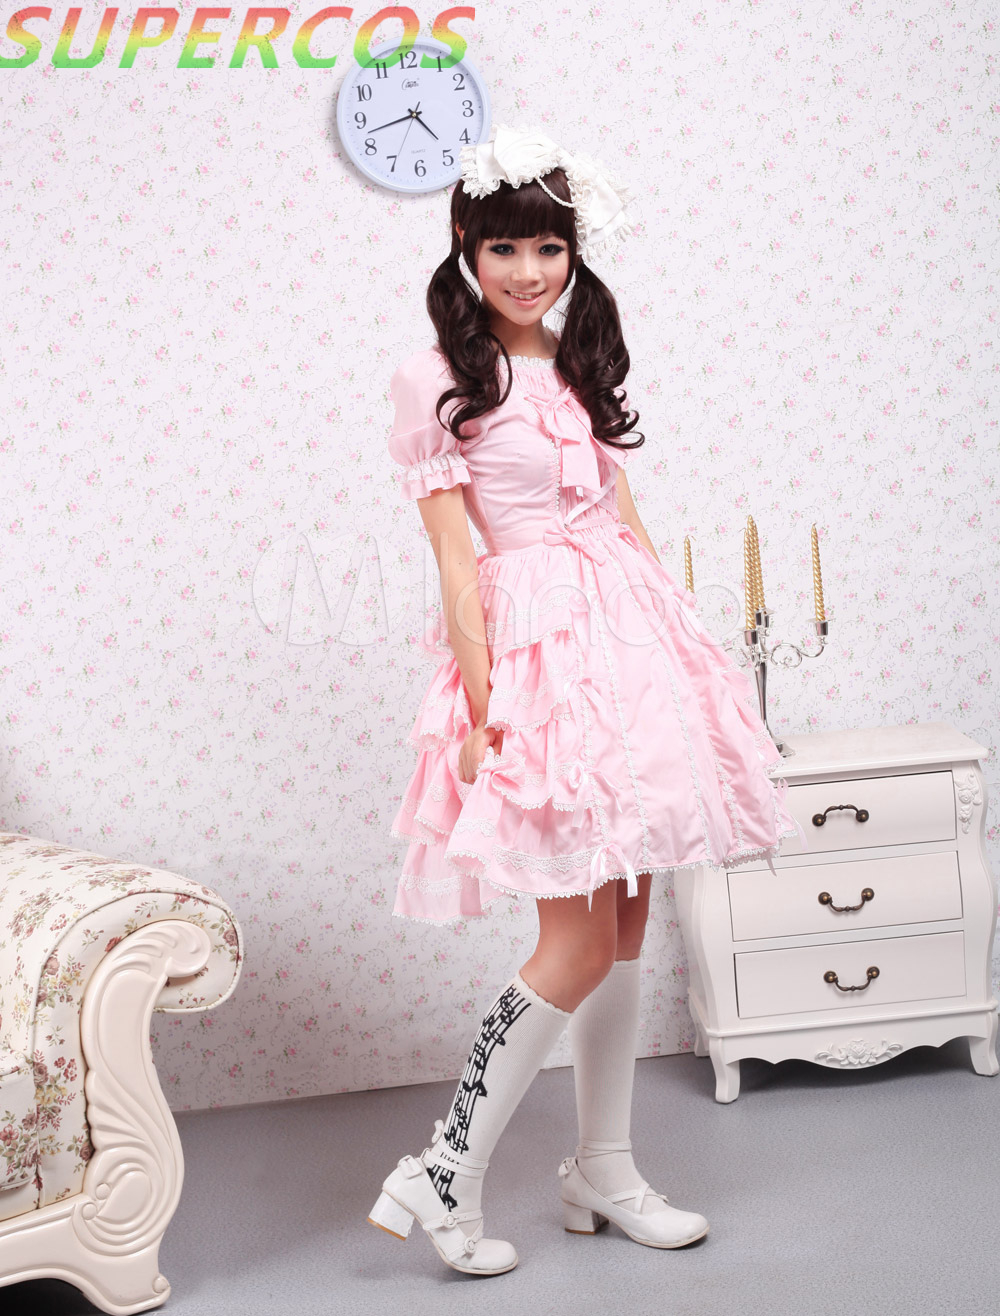 Free shipping! New Arrivals! High quality! Square Neck Pink Lace Ruffles Lolita Dress